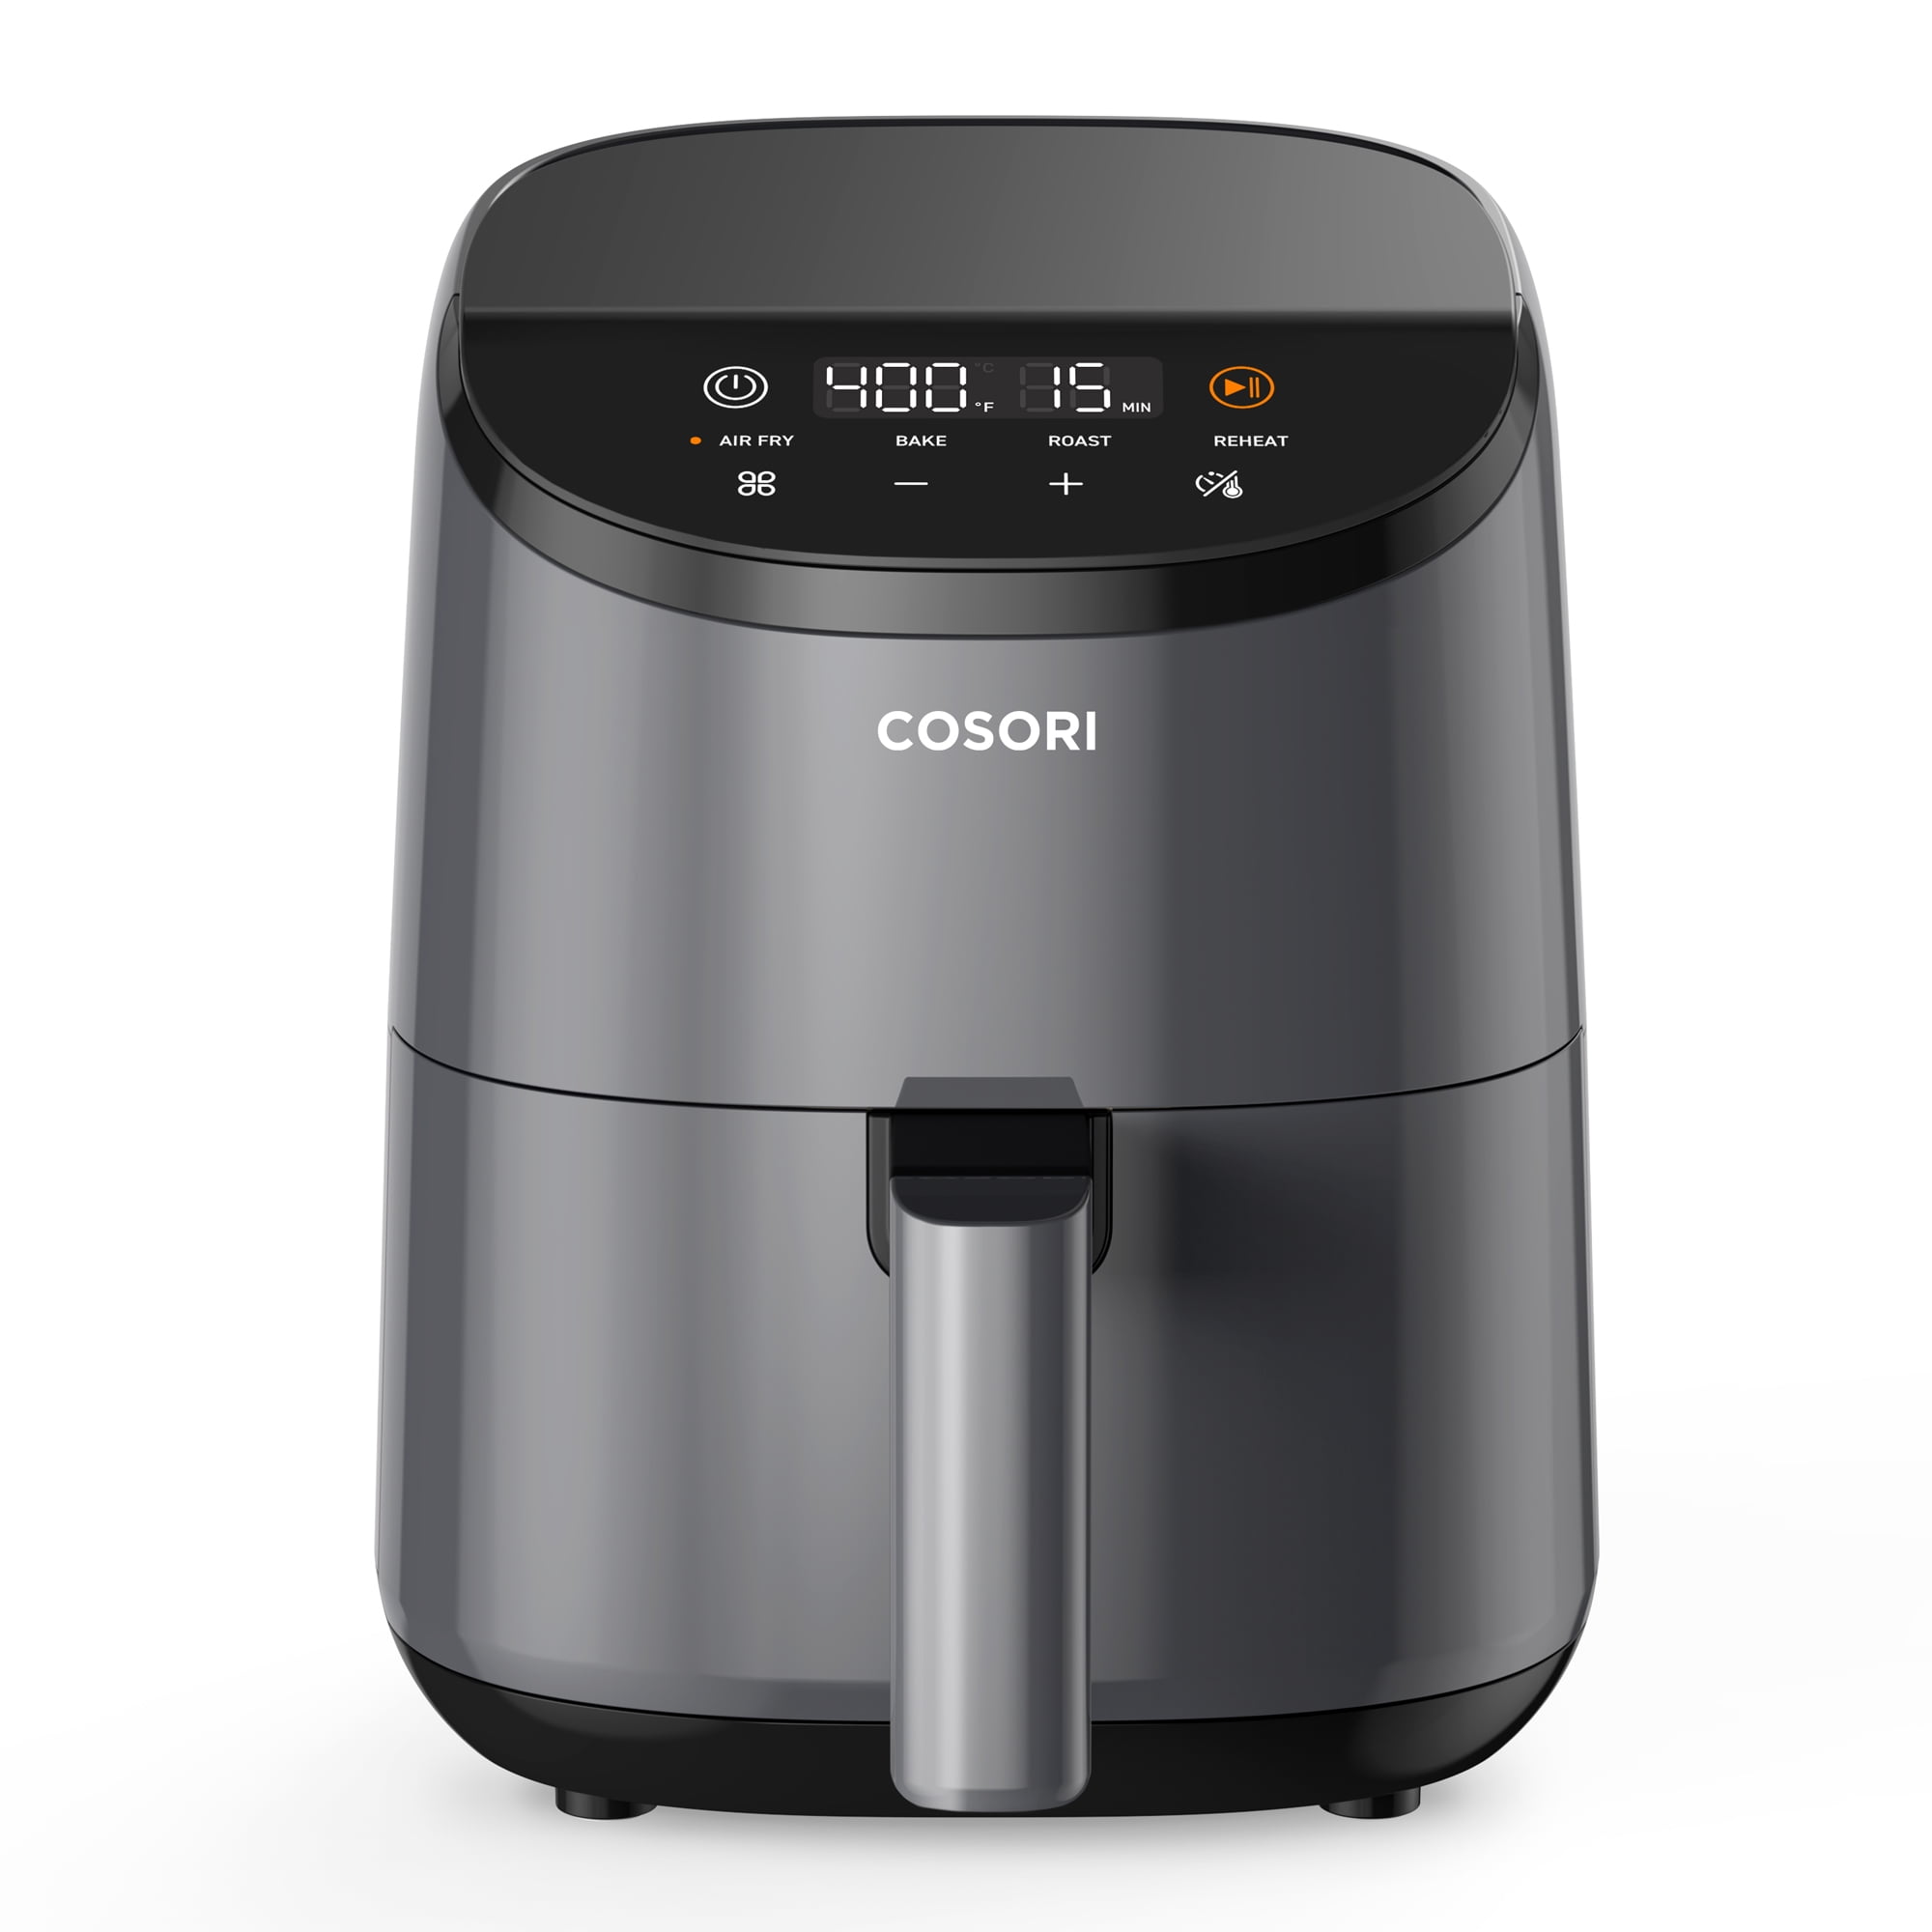 All-in-one air fry cookers from $90: COSORI Smart 30L, Instant